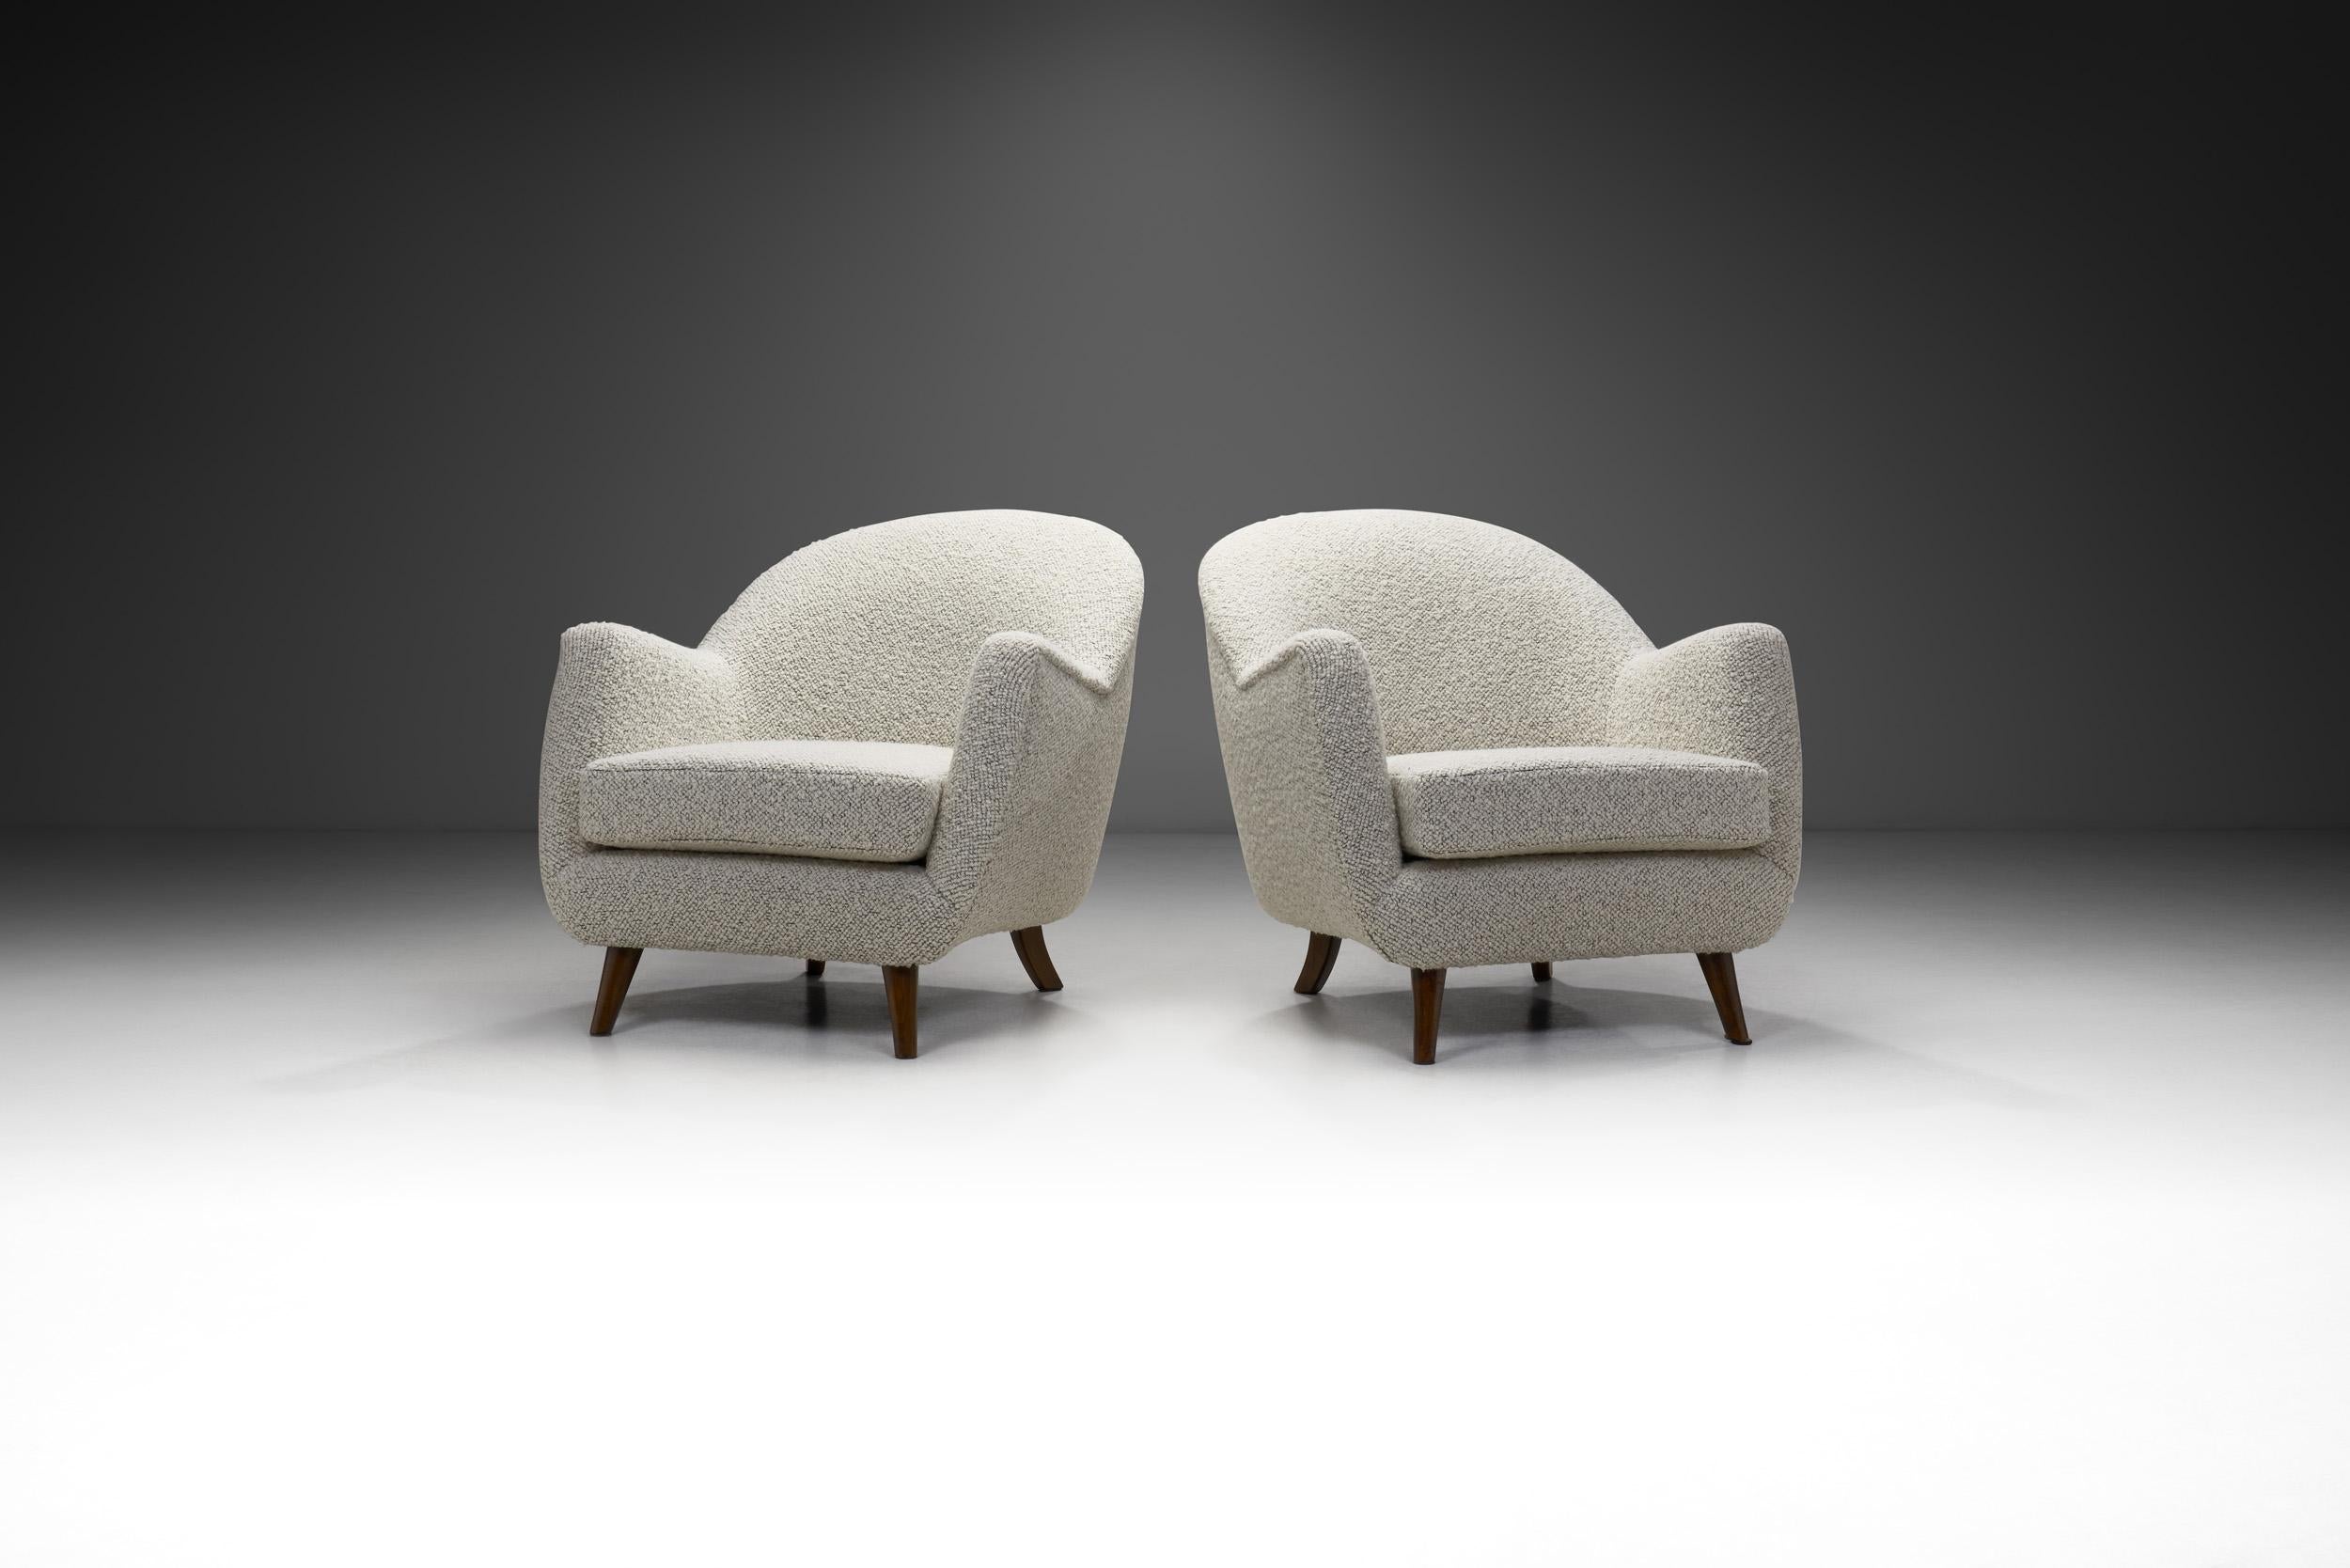 European Mid-Century Modern Armchairs, Europe Late 20th Century For Sale